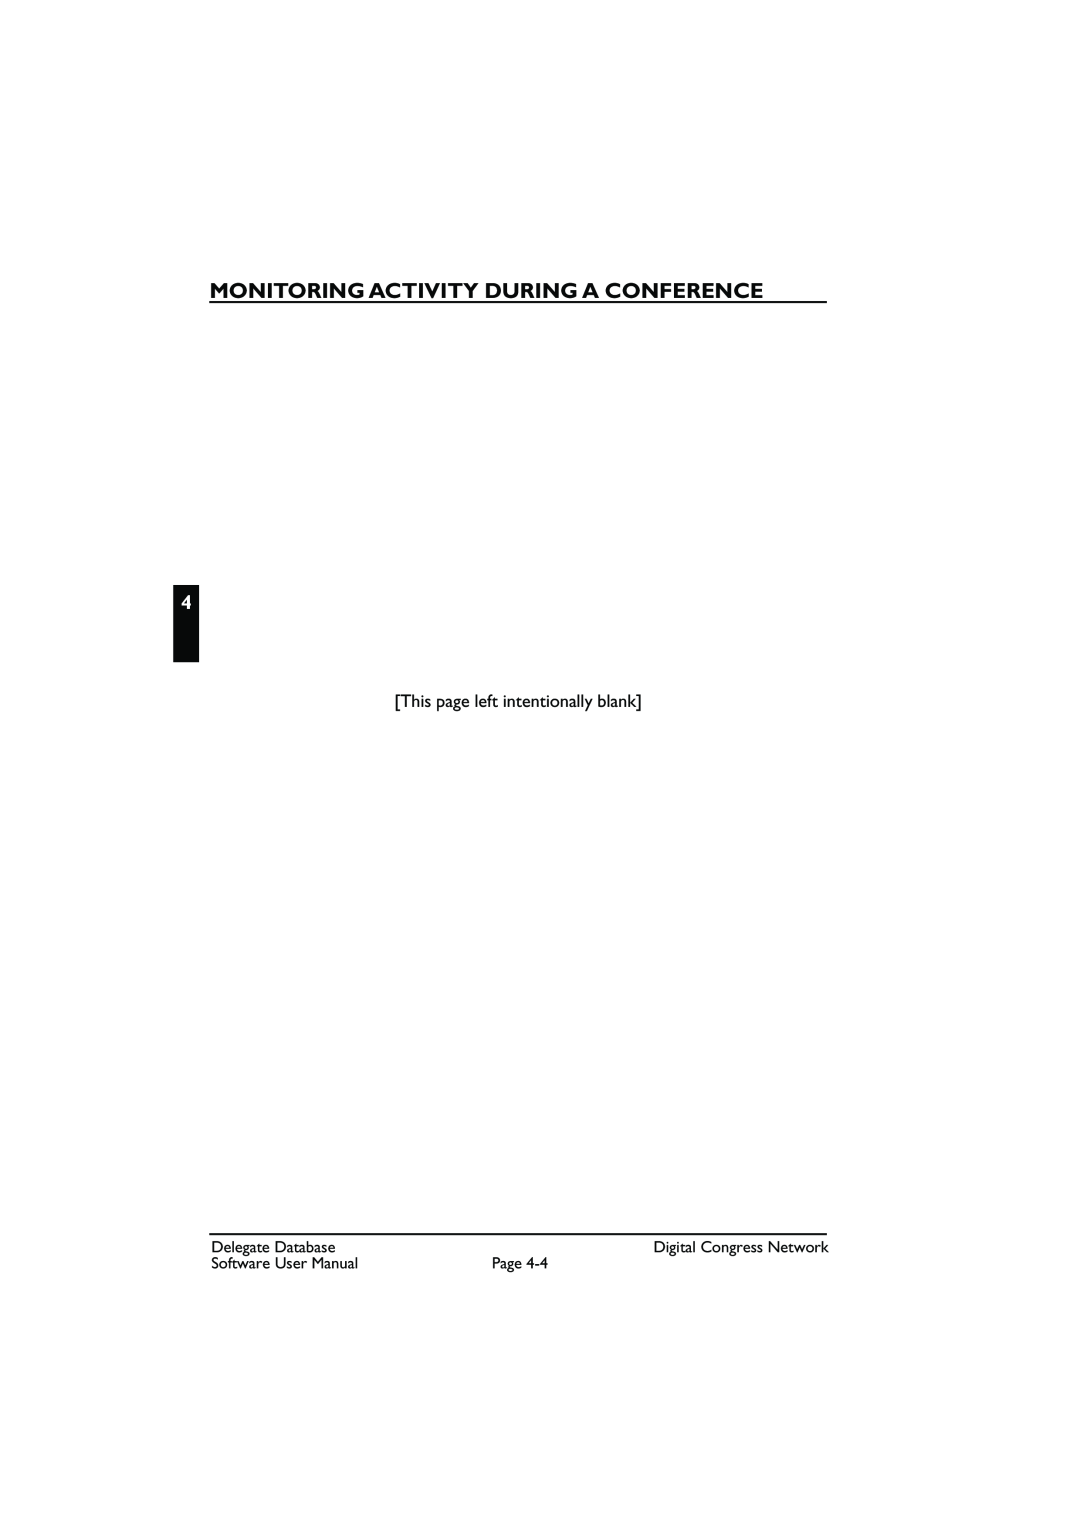 Bosch Appliances LBB3580 user manual Monitoring Activity During A Conference, This page left intentionally blank 